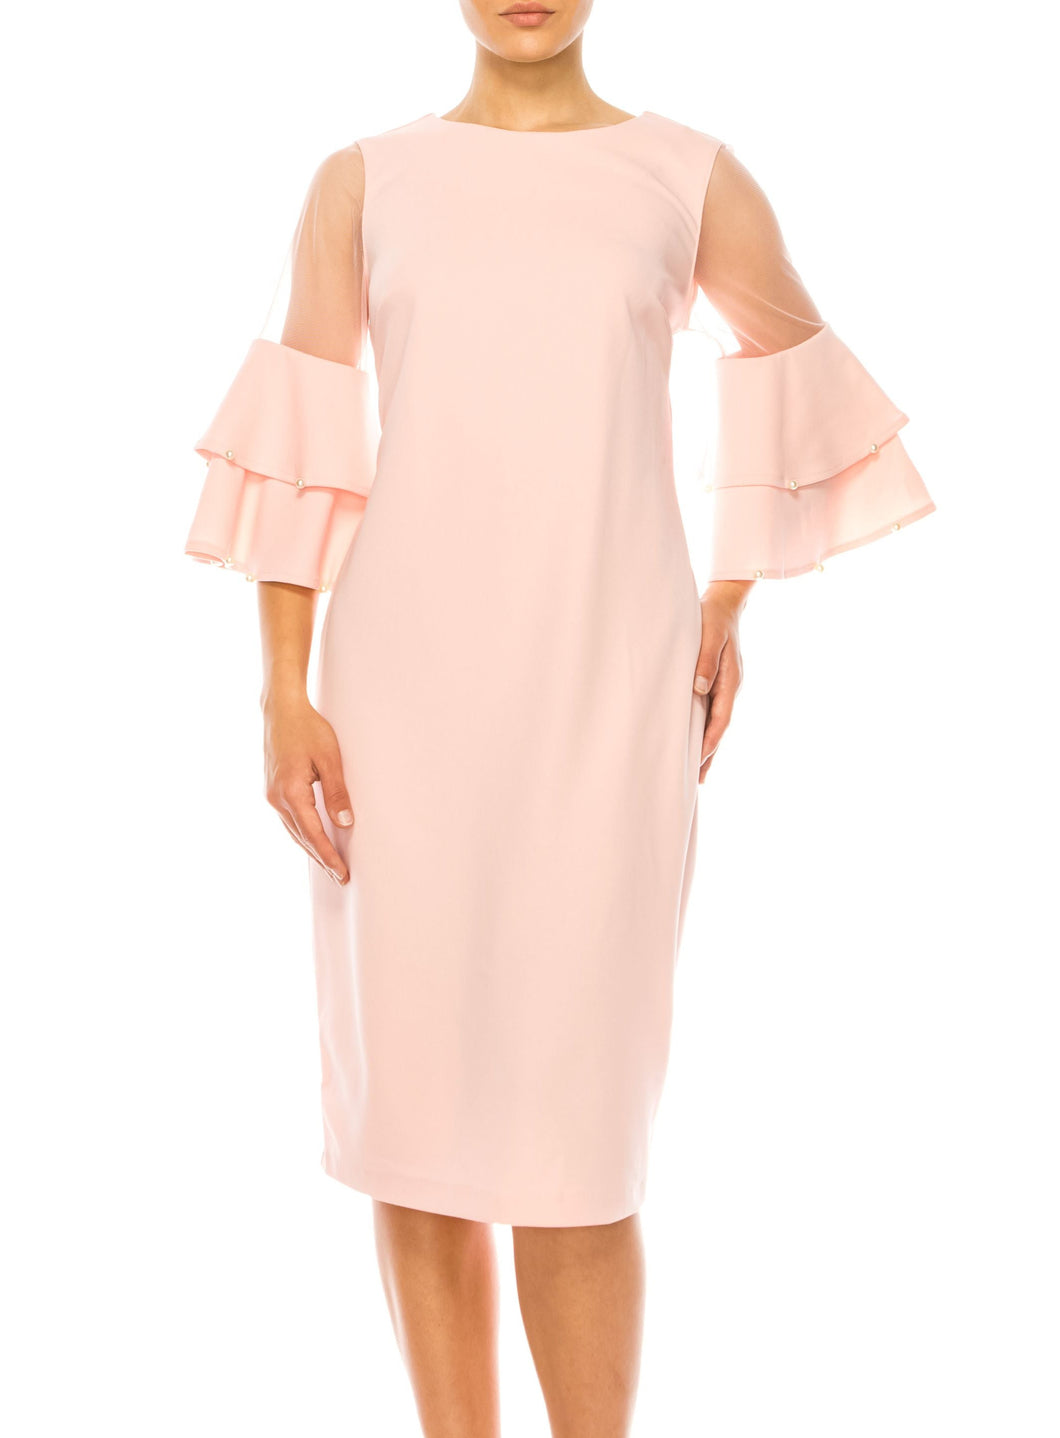 Jessica Rose Pearl Bell Sleeve Day Dress Sizes 8/10/12